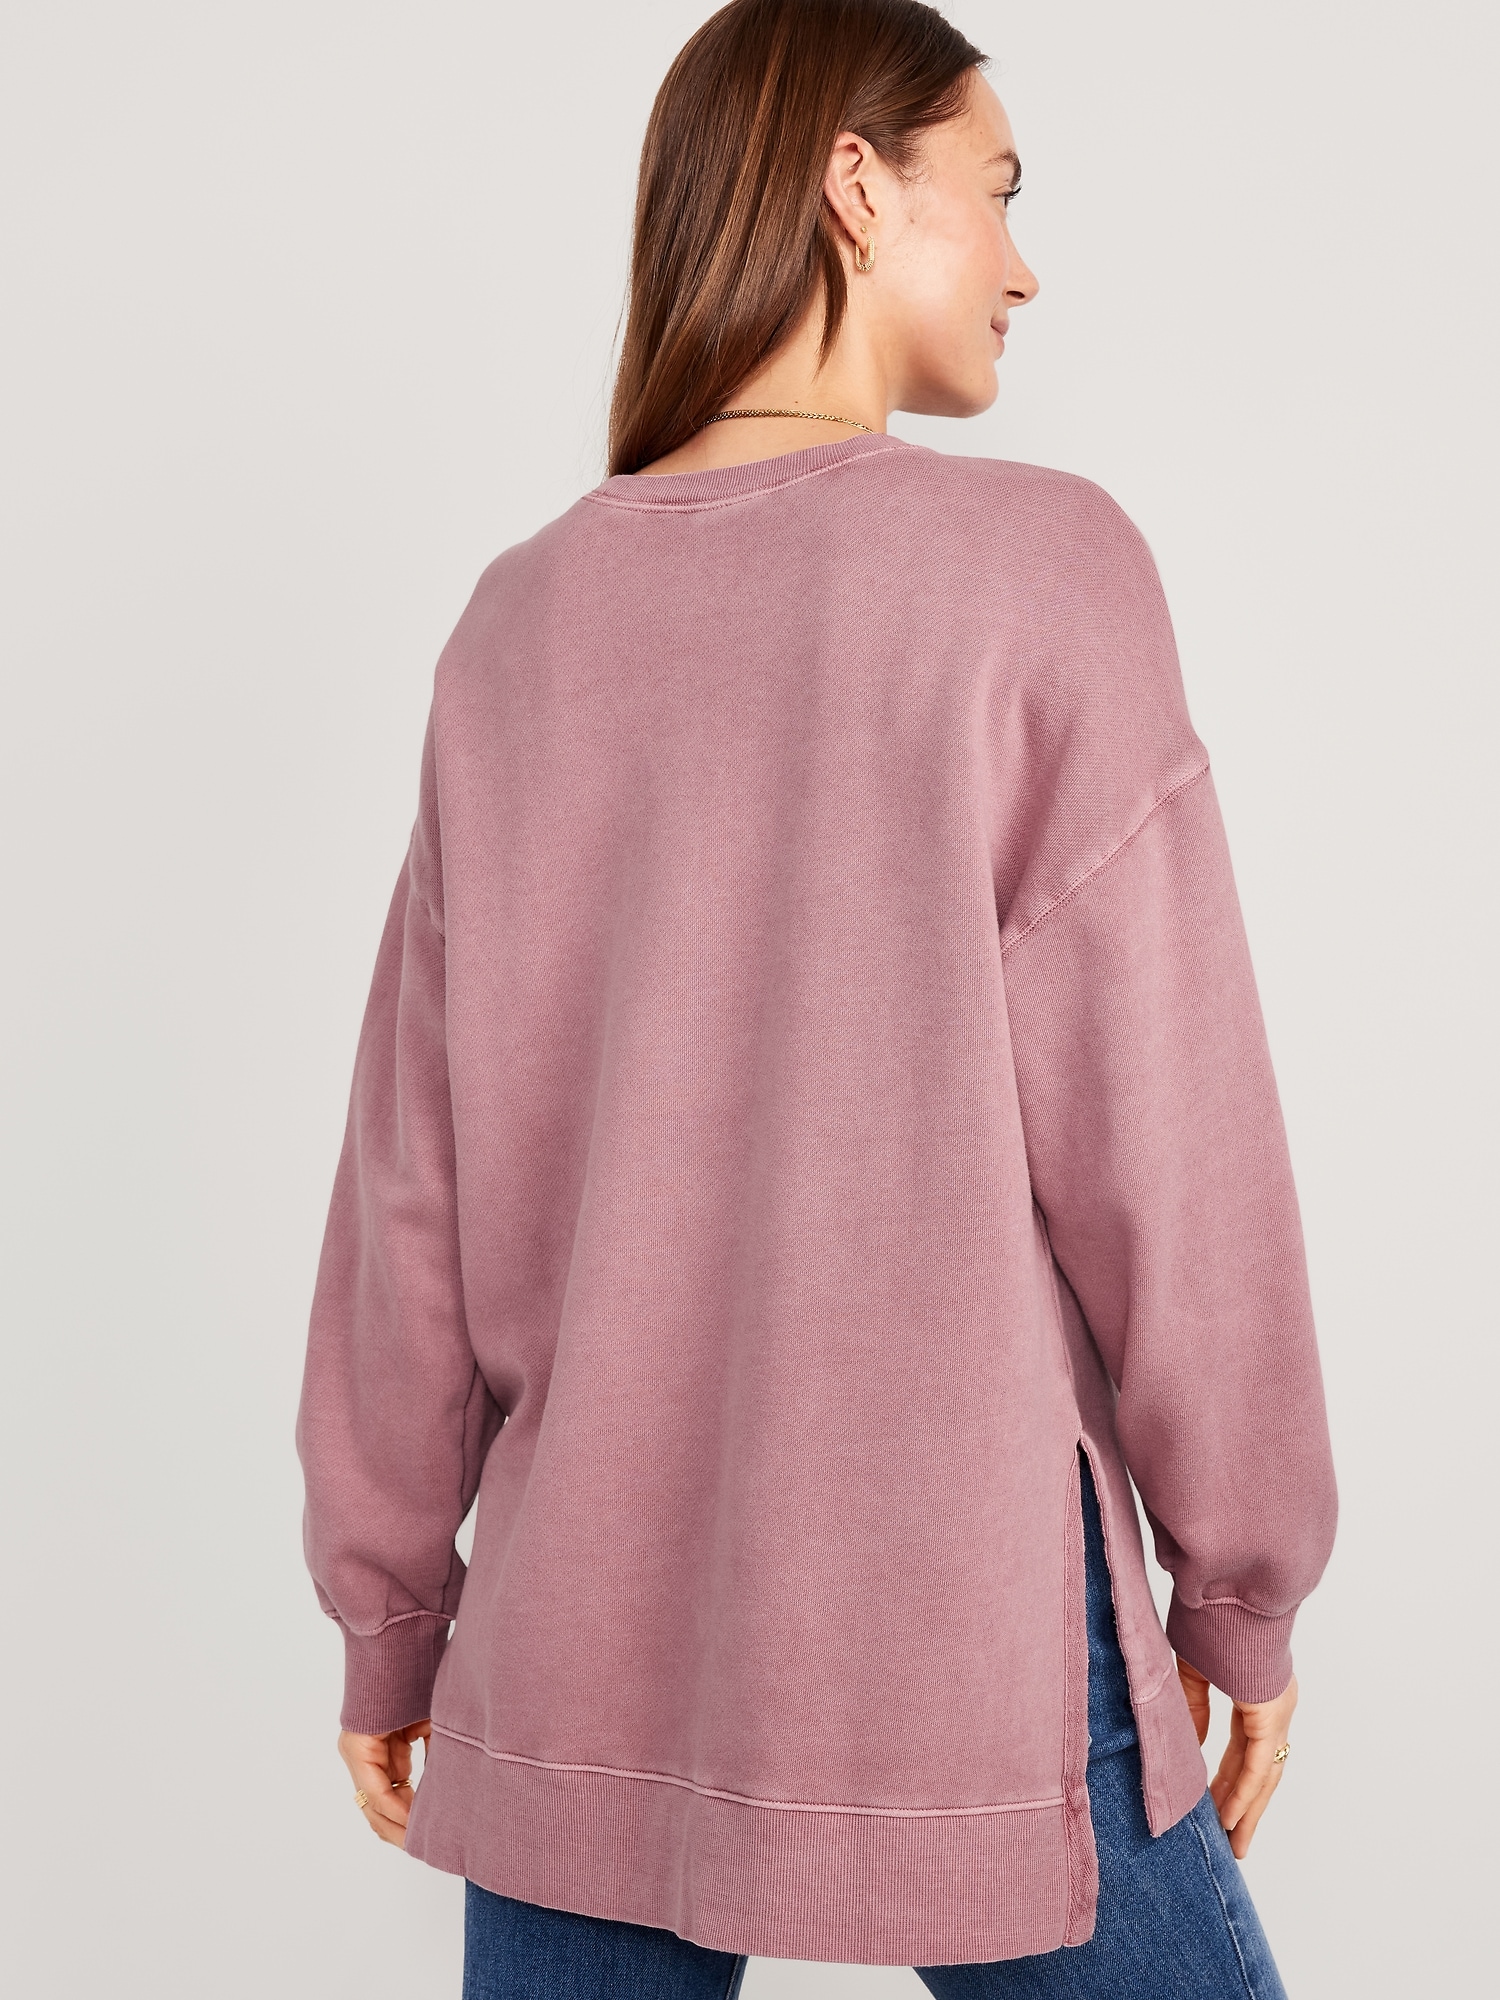 Odsufo Long Sleeve Sweatshirt for Women,Over Sized Pullover Tunic